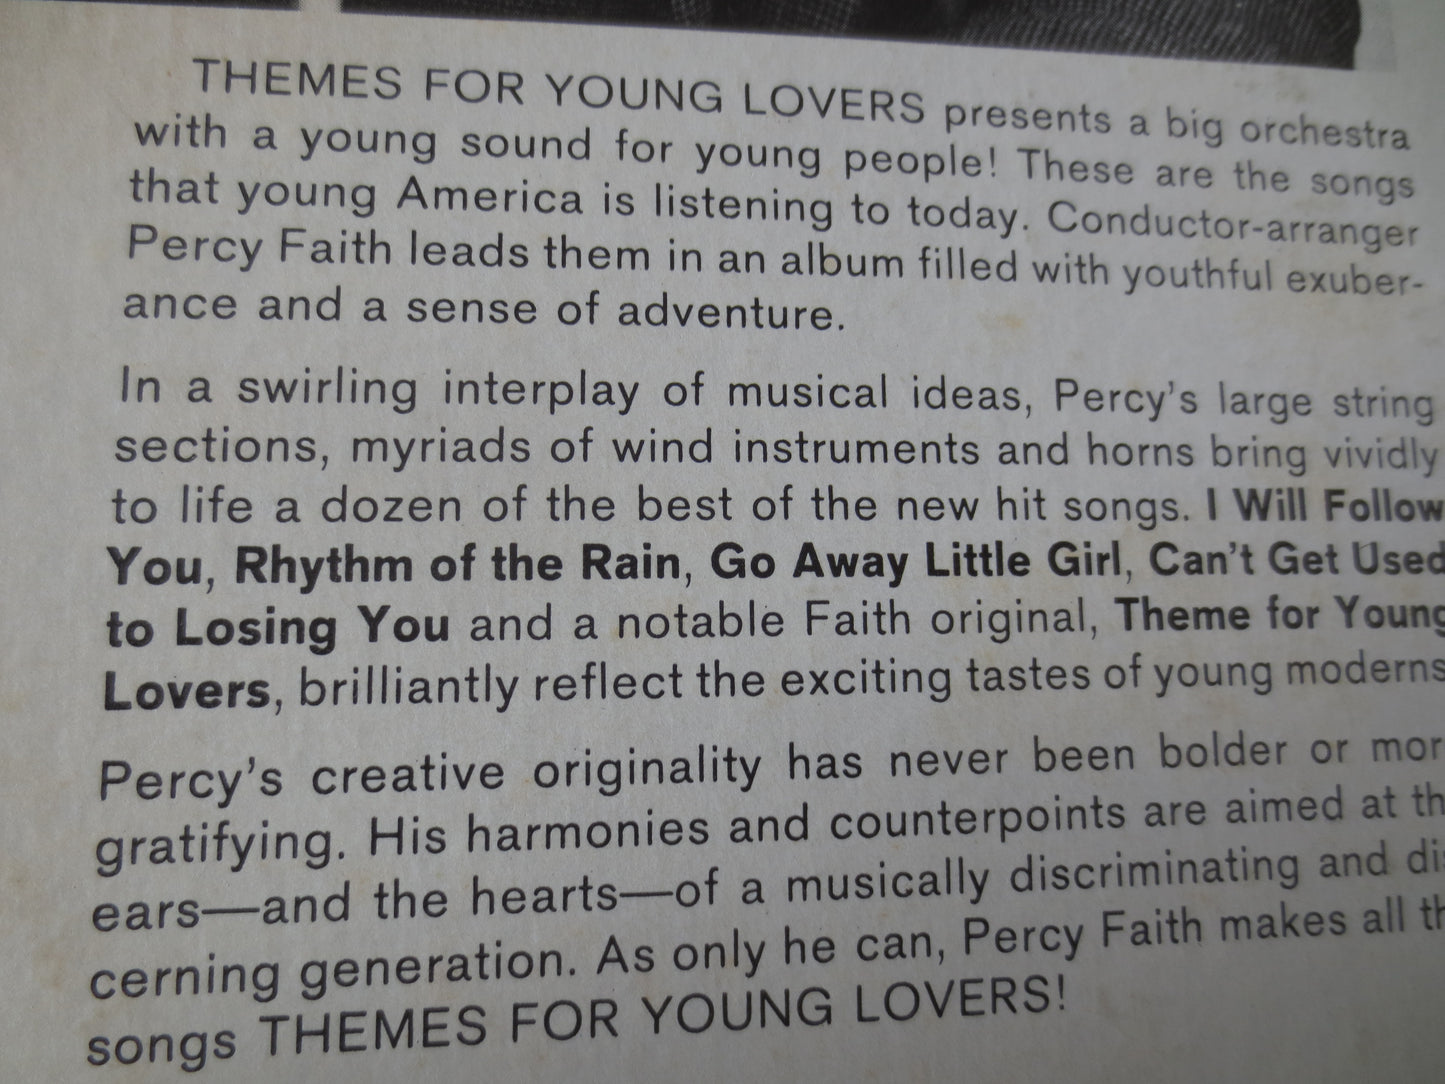 PERCY FAITH, Themes For Young LOVERS, Percy Faith Records, Percy Faith Album, Percy Faith Vinyl, Vinyl Lp, 1963 Records